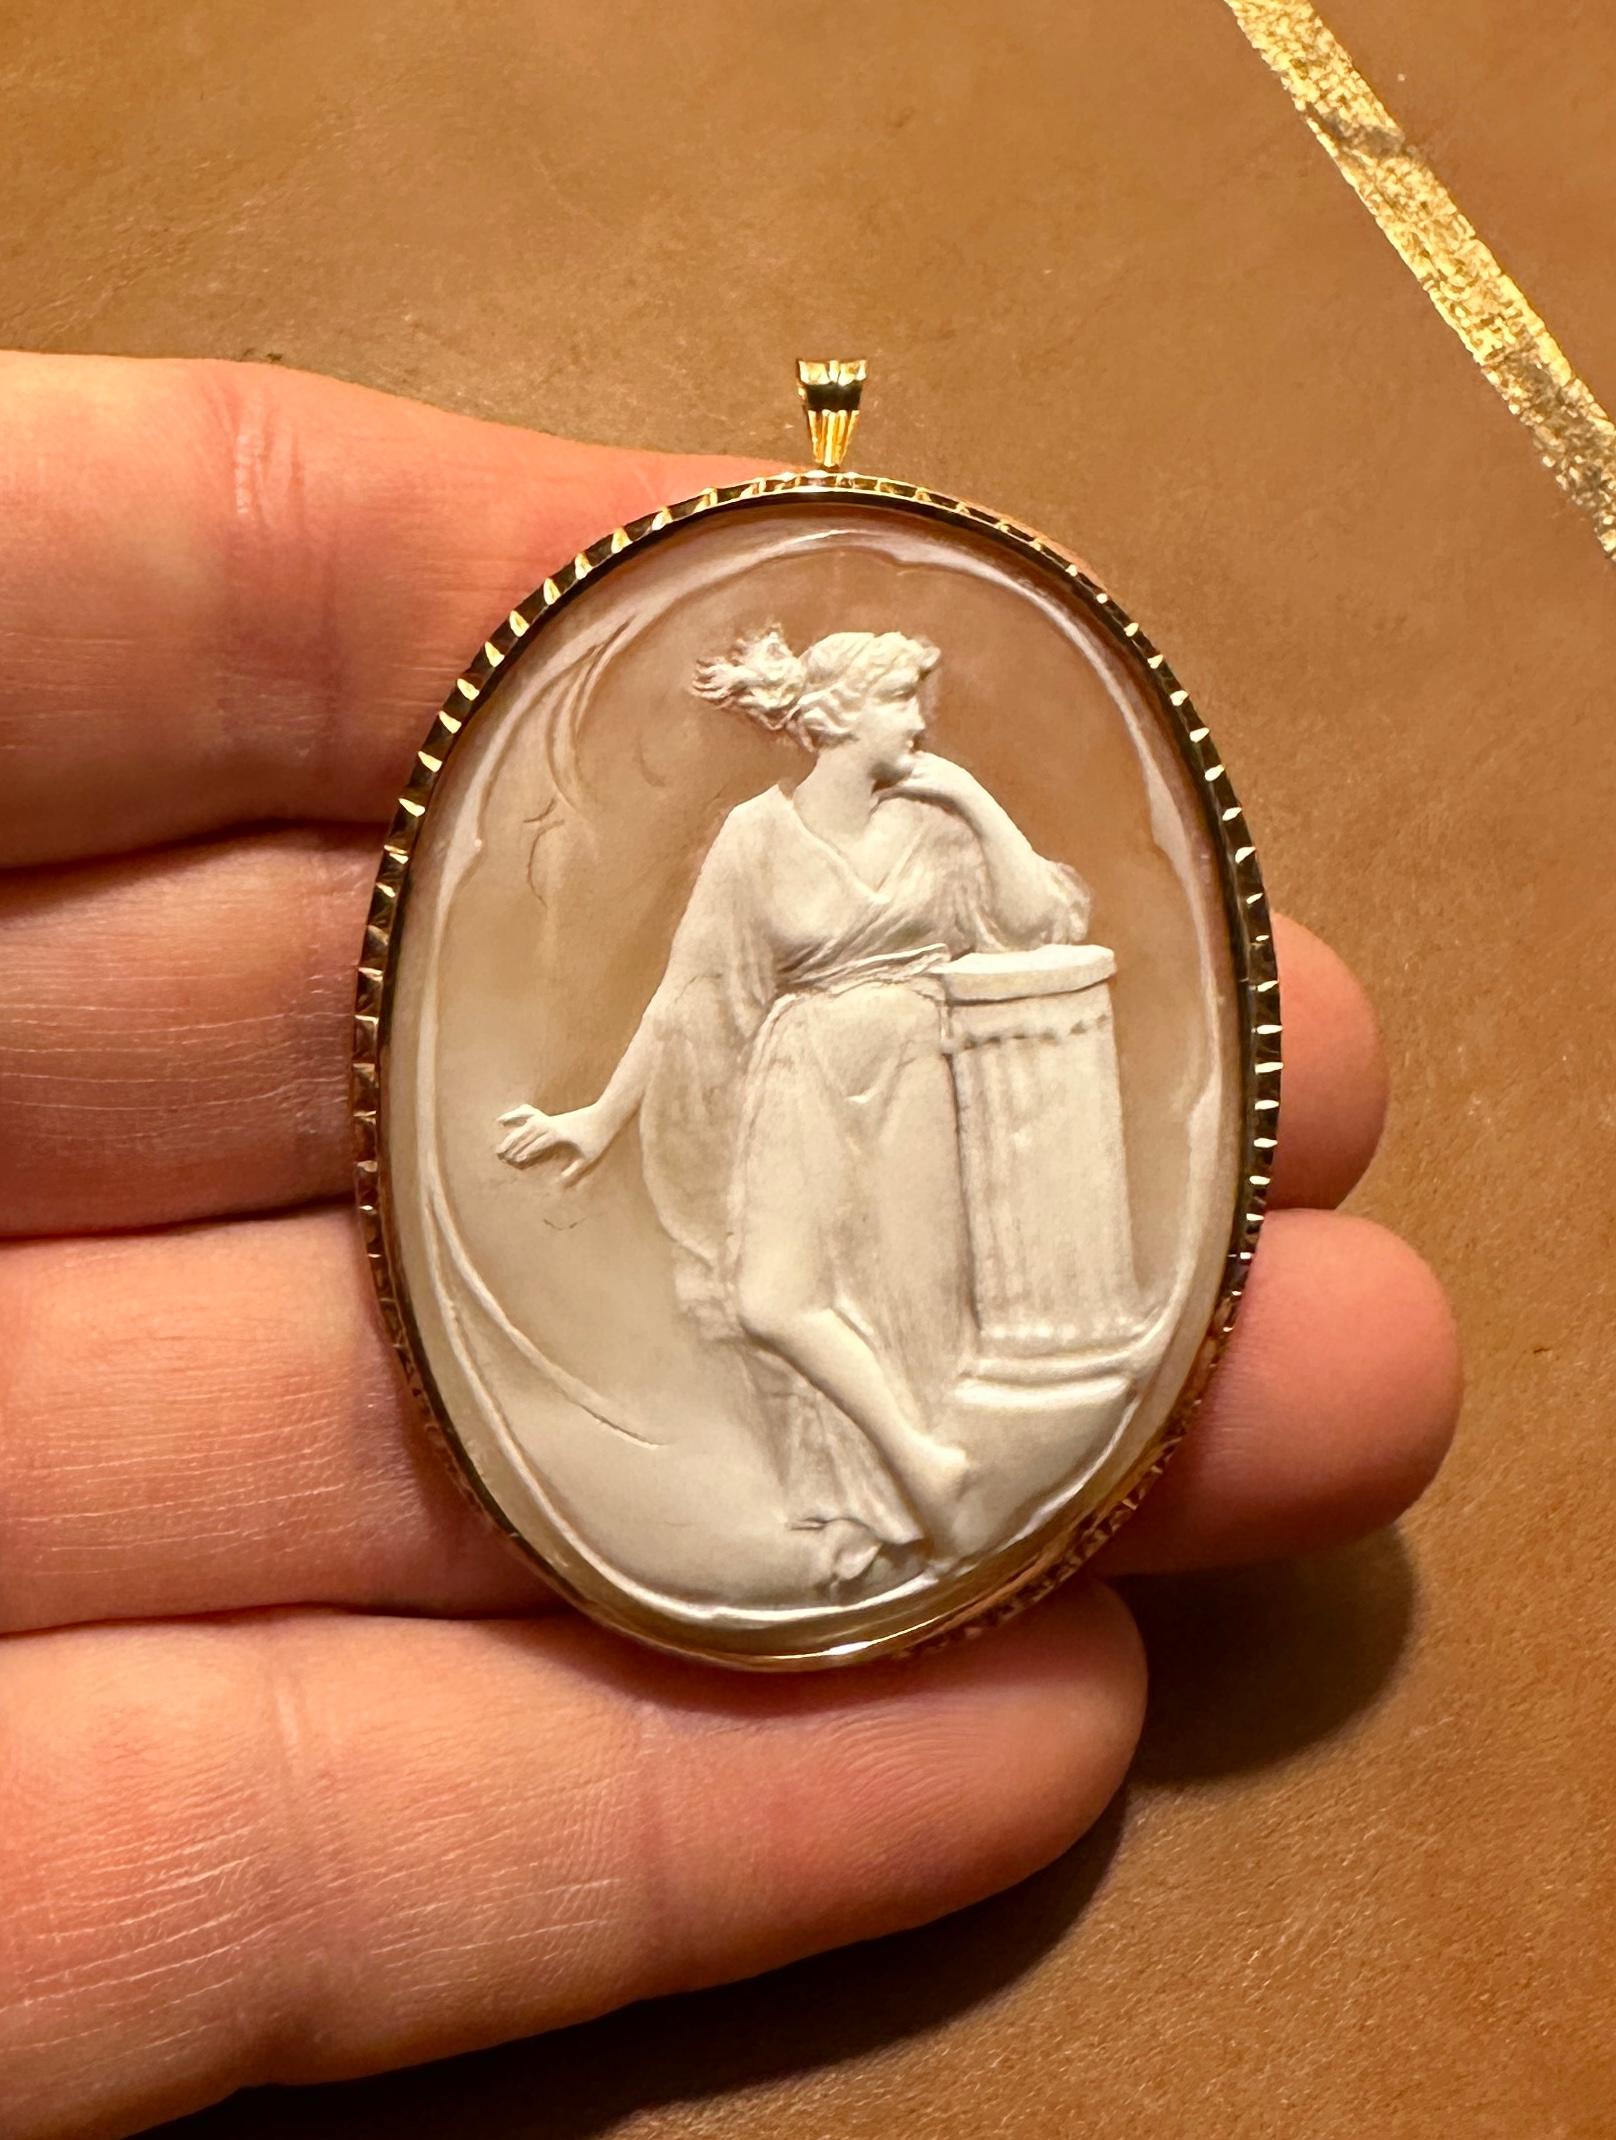 This is an absolutely stunning and very rare large antique Shell Cameo Pendant Brooch with a hand carved image of a Goddess Maiden standing by a Greek or Roman Column!  The cameo is set in 18 Karat Yellow Gold and has a bale to be worn as a necklace